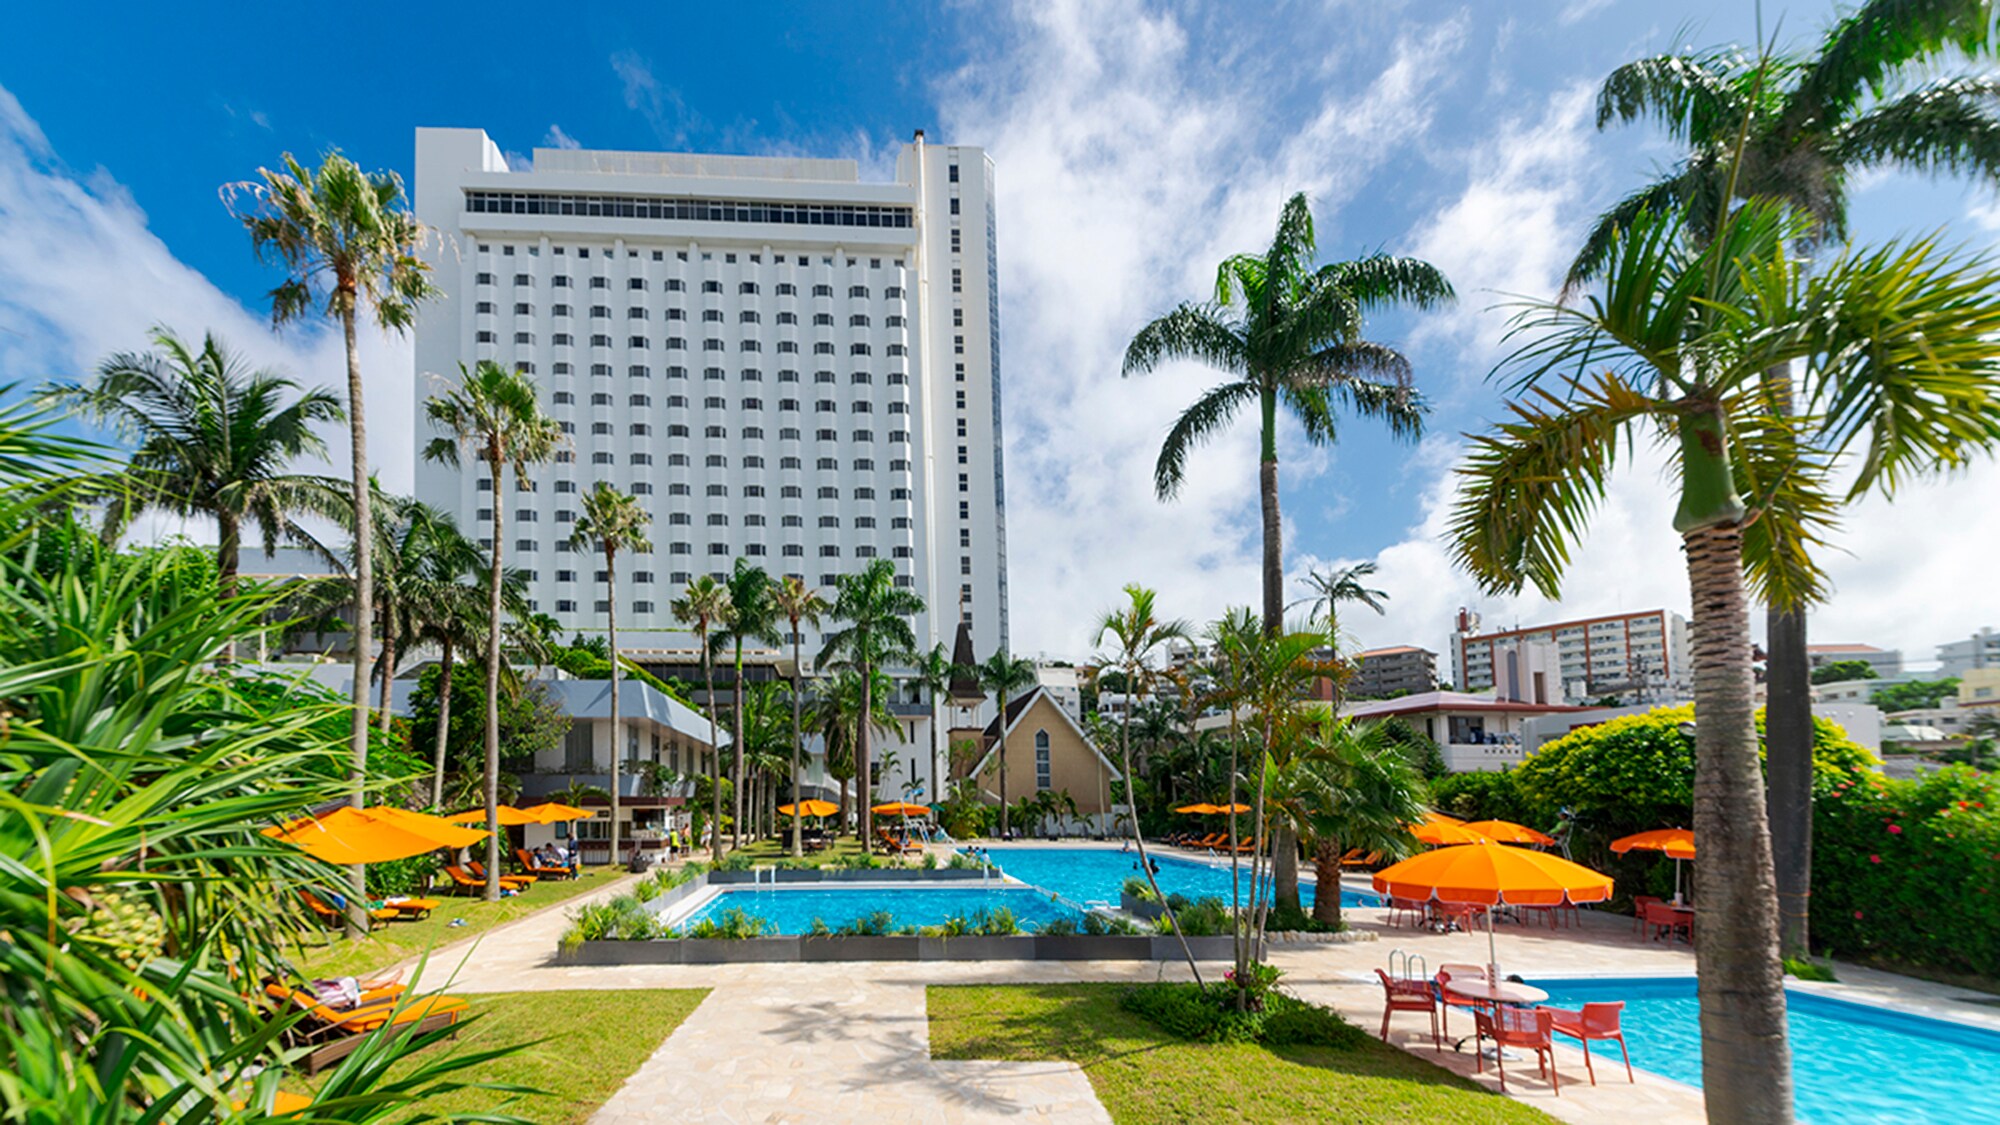 [Summer Garden Pool] One of the largest outdoor pools in Naha City, surrounded by palm trees and greenery!